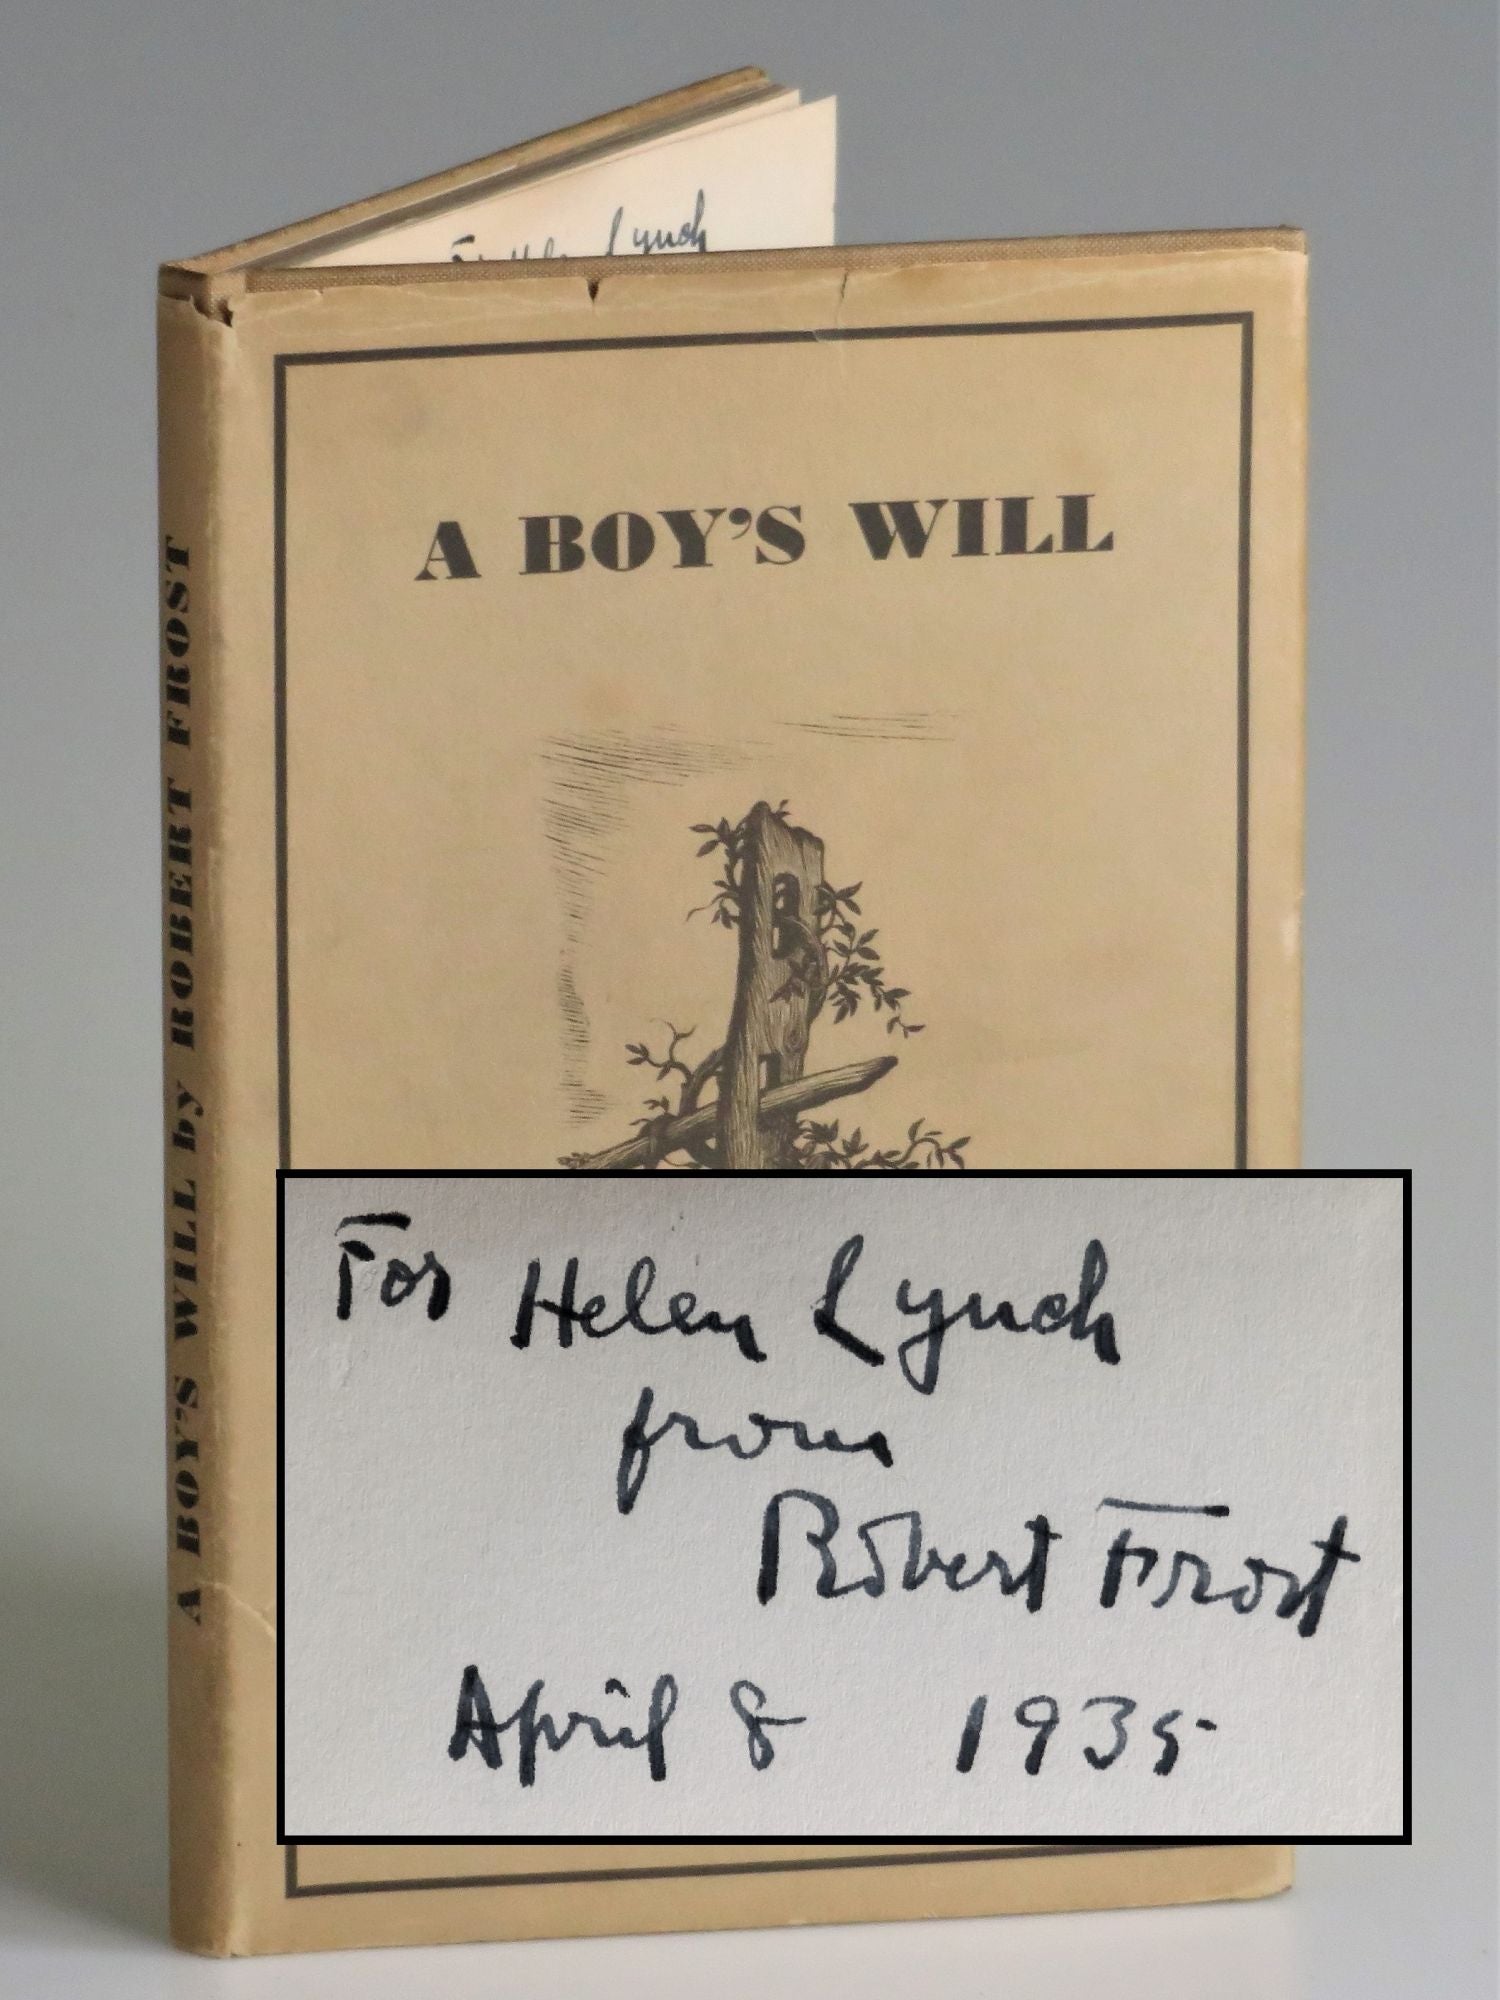 A　dated　Boy's　Robert　Frost　Will,　1935　inscribed　and　Frost　Second　by　in　April　Robert　American　Edition